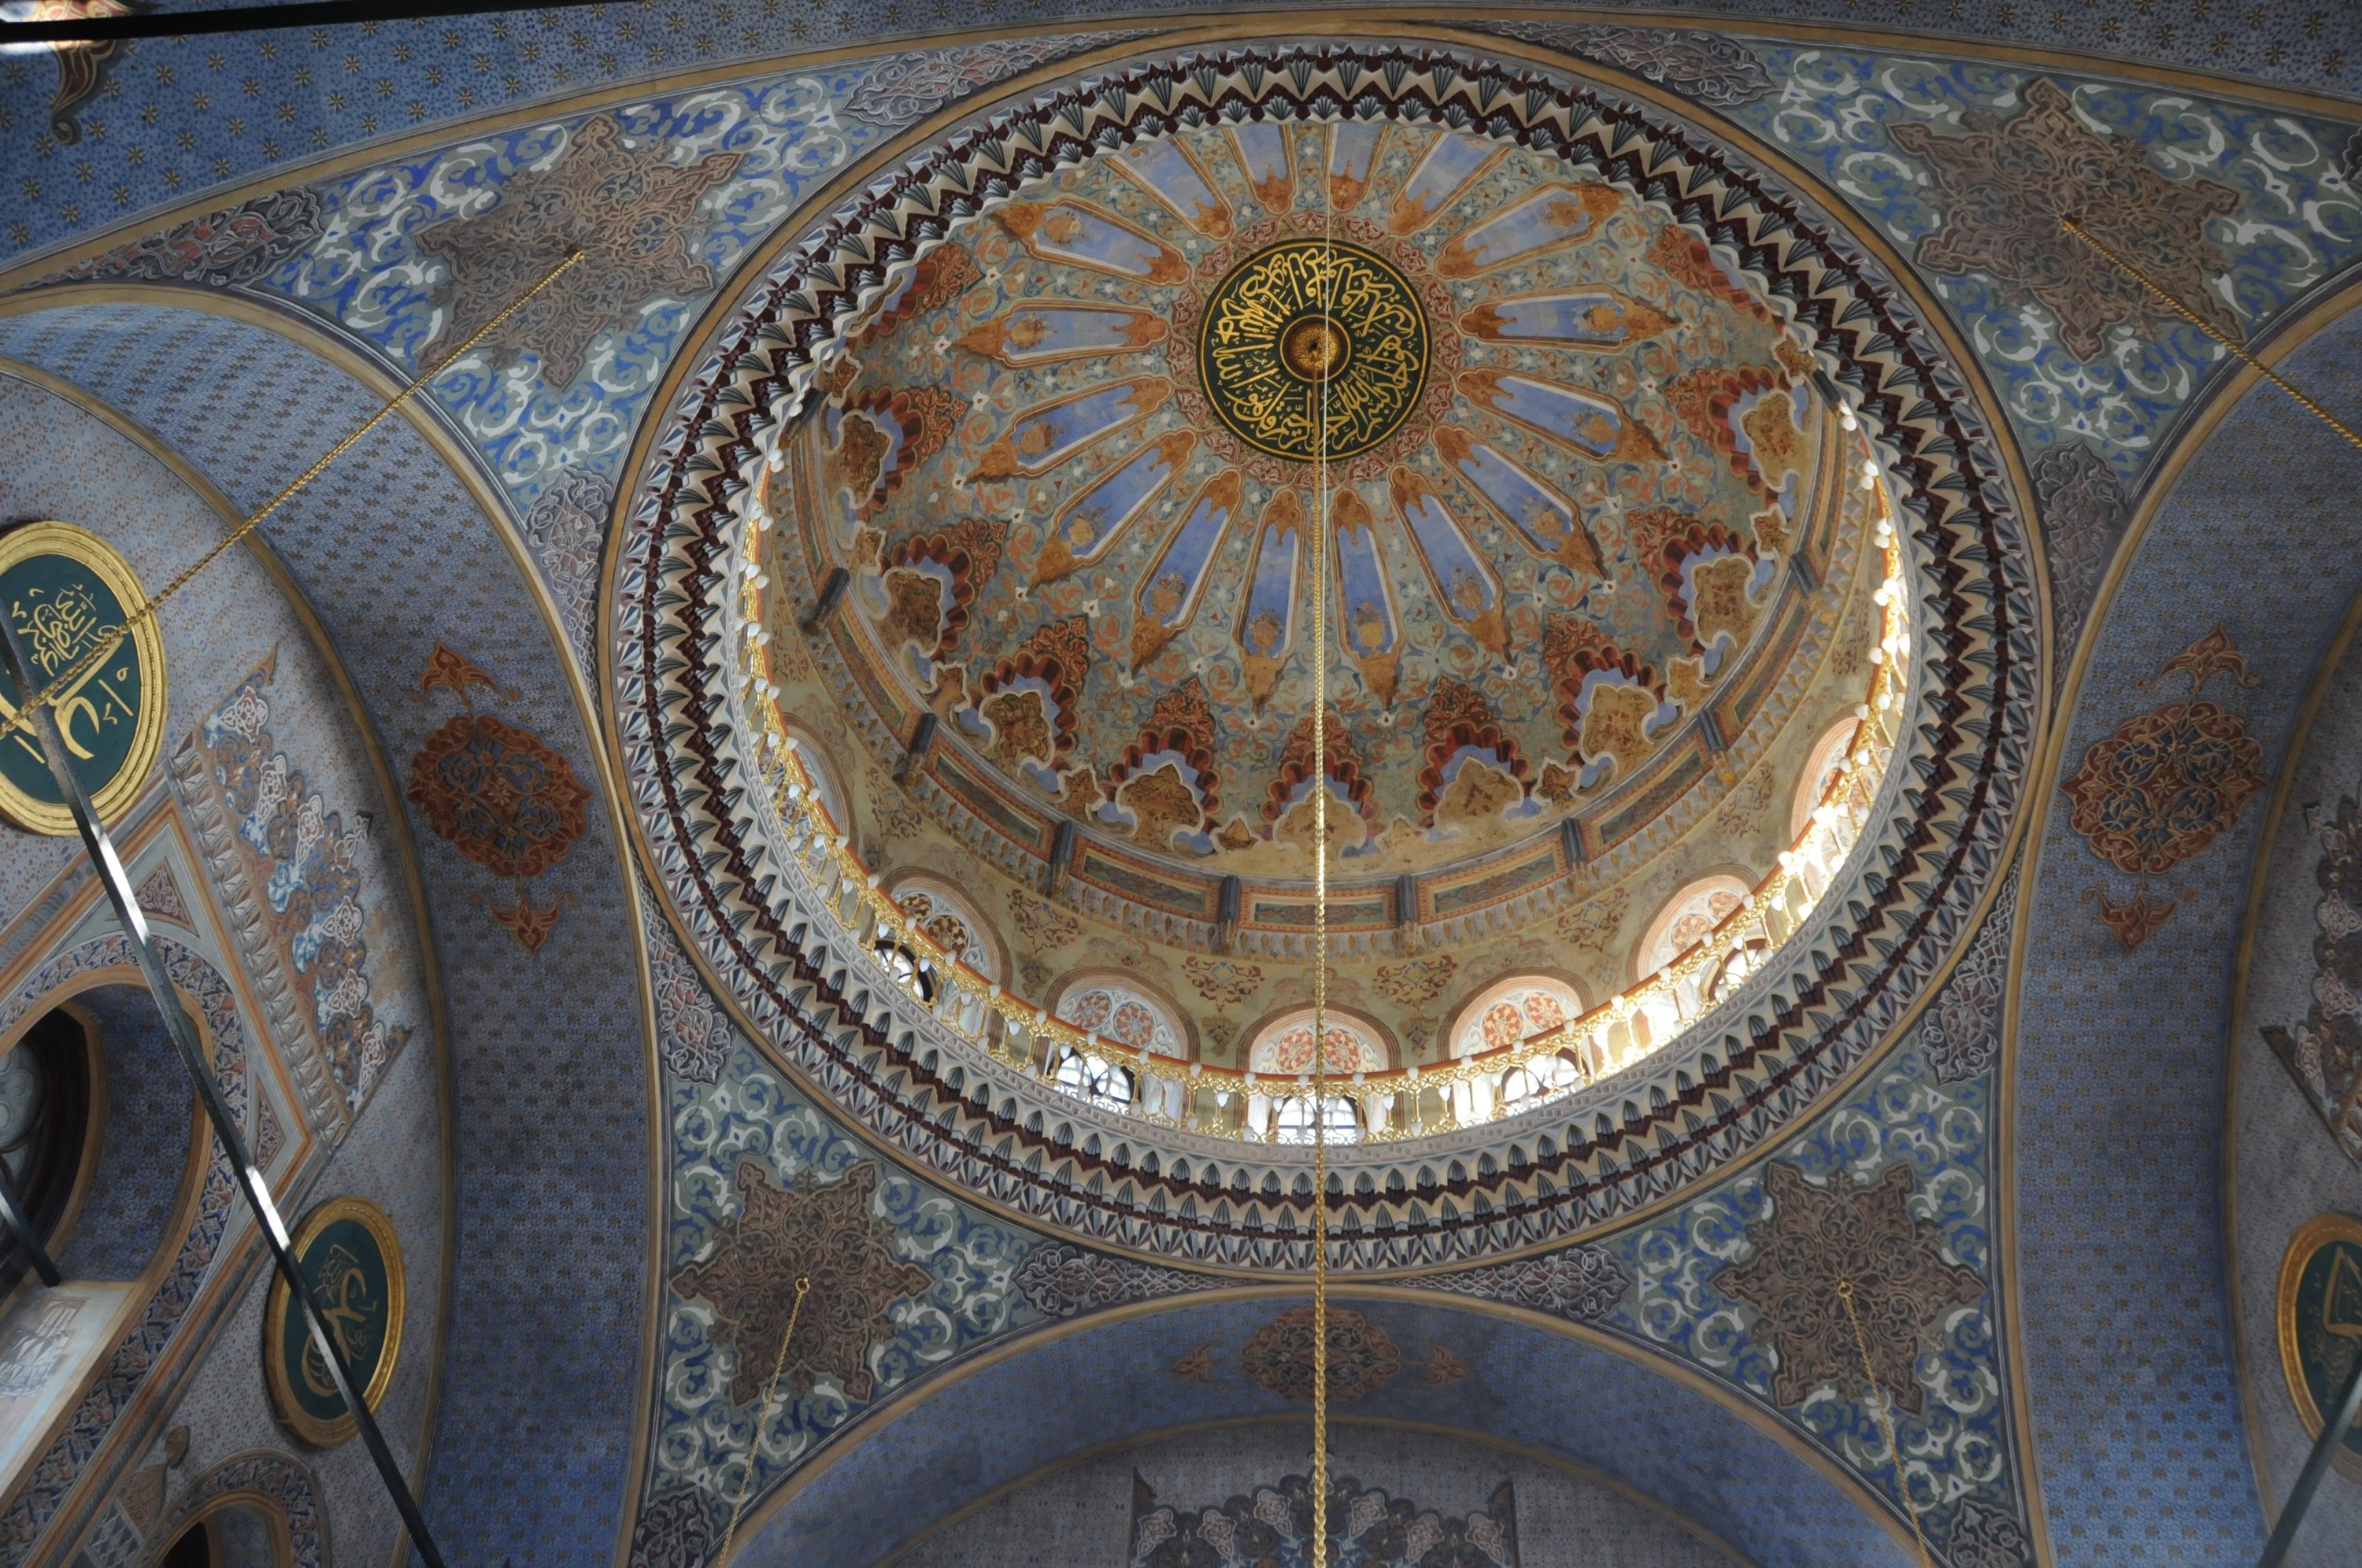 Interior view of Pertevniyal Valide Sultan Mosque, Aksaray, Istanbul, March 9, 2011. (Photo by Hasan Ay)